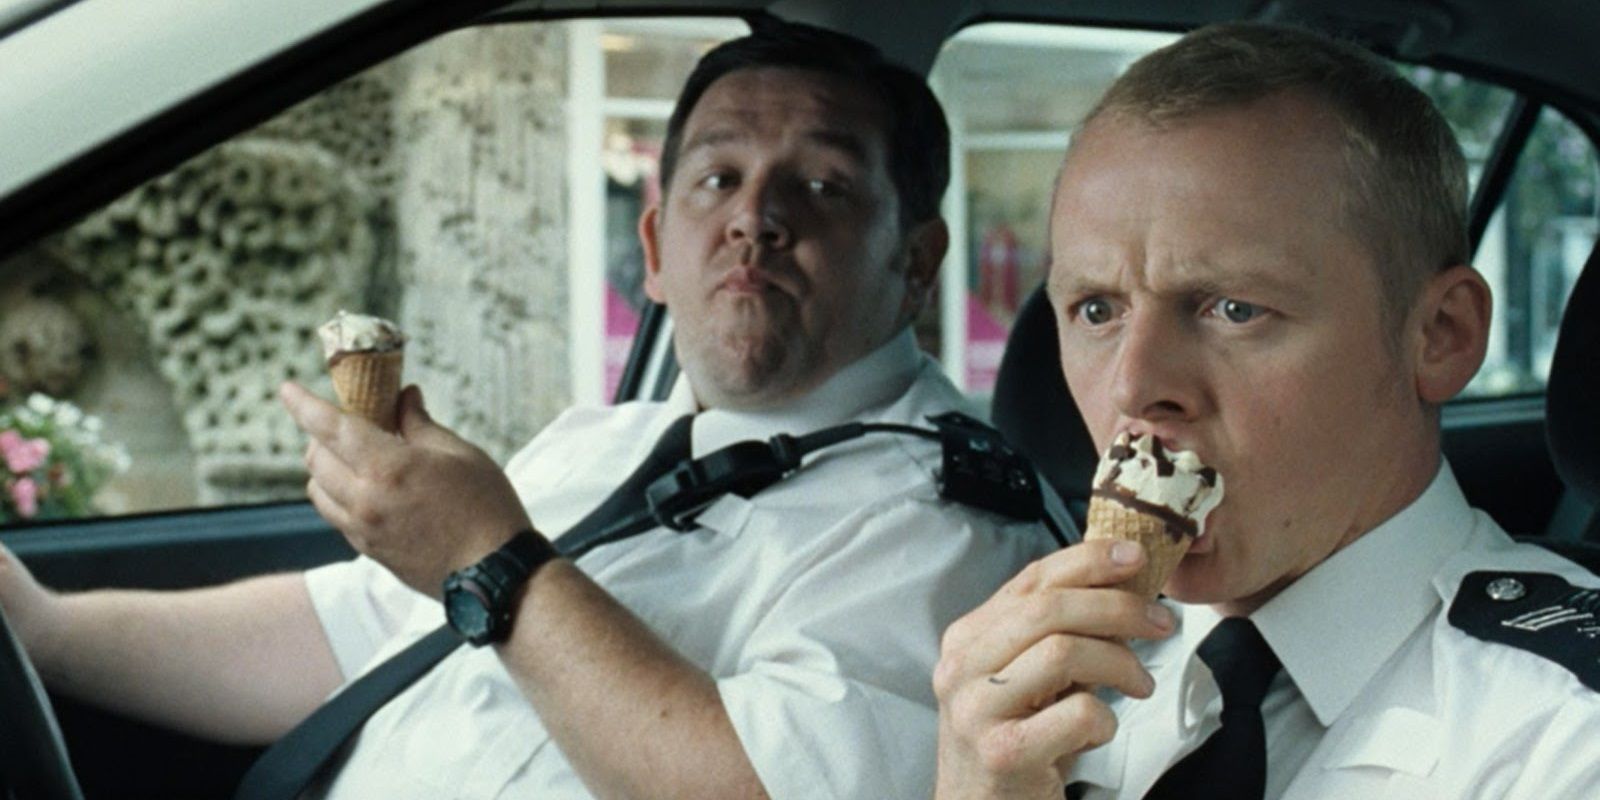 Simon Pegg as Nicholas and Nick Frost as Danny in Hot Fuzz